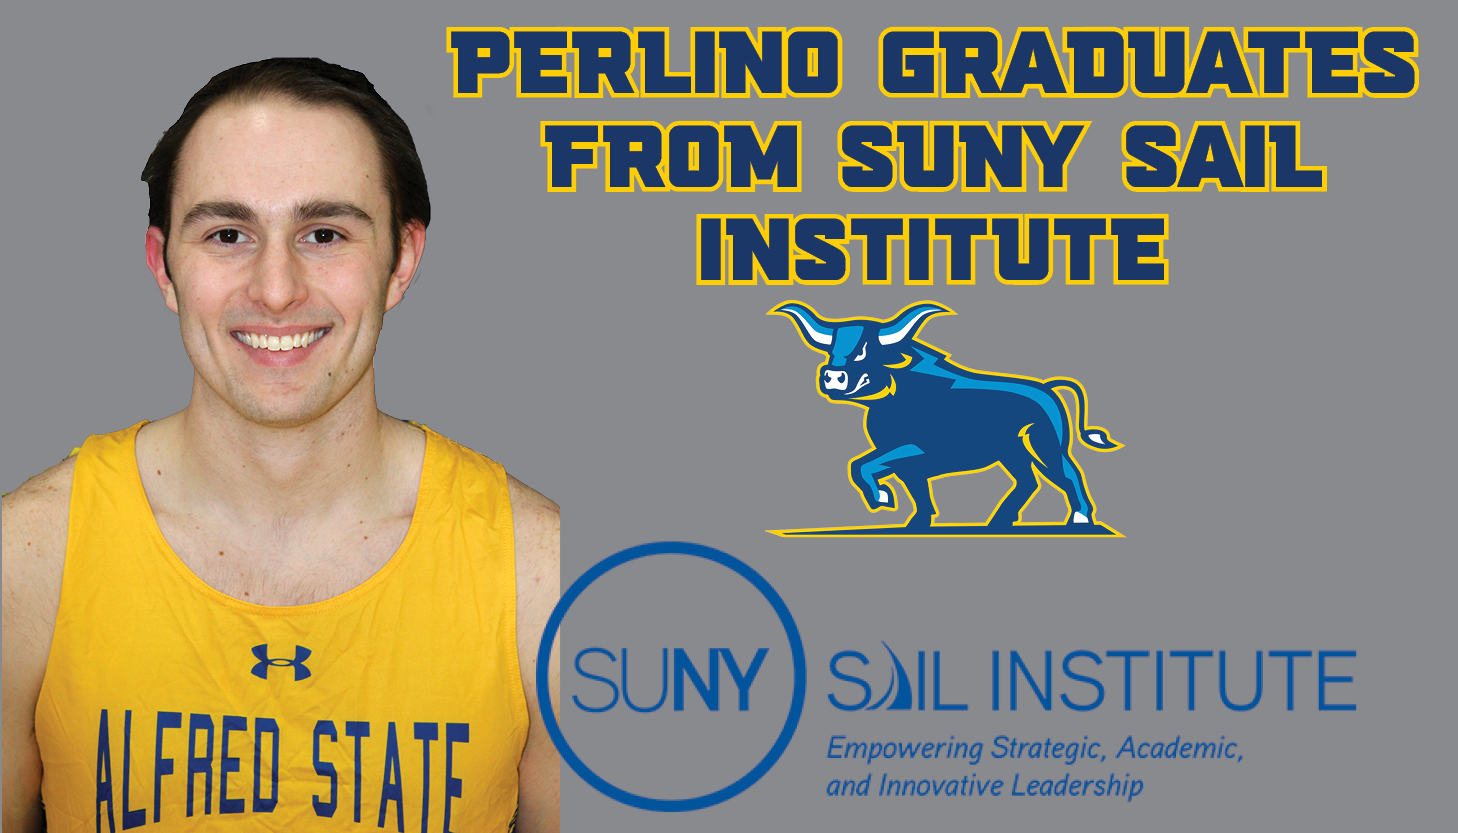 Alfred State junior thrower Dylan Perlino (Holland) recently graduated from the 2020 SUNY SAIL Institute Student Leadership Academy. Perlino is pictured with the SAIL Institute logo and the Alfred State logo.